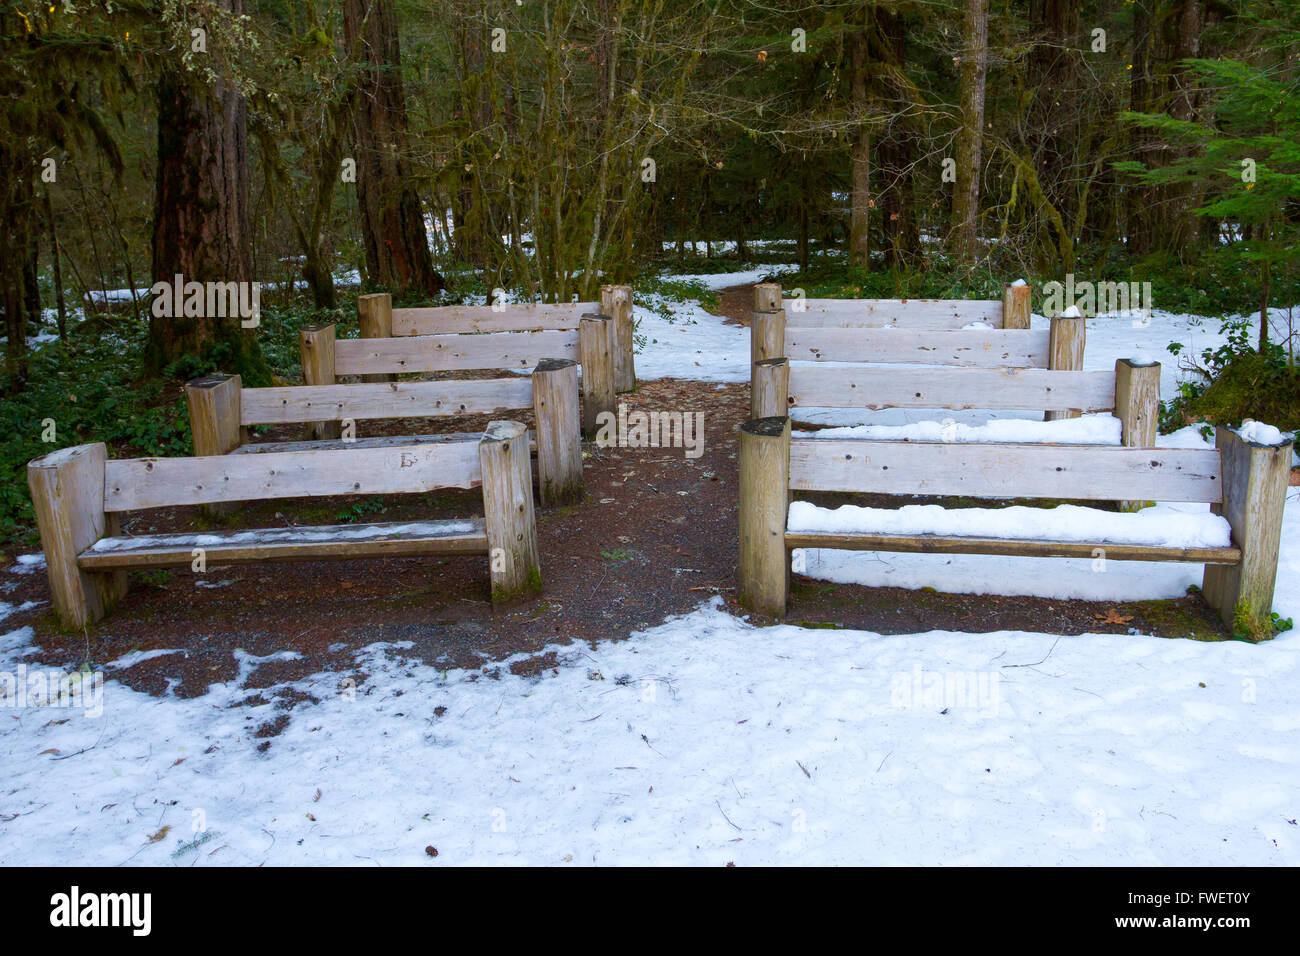 Wooden benches were built by hand and placed in this wooded setting to create an ampitheater with seating. Stock Photo